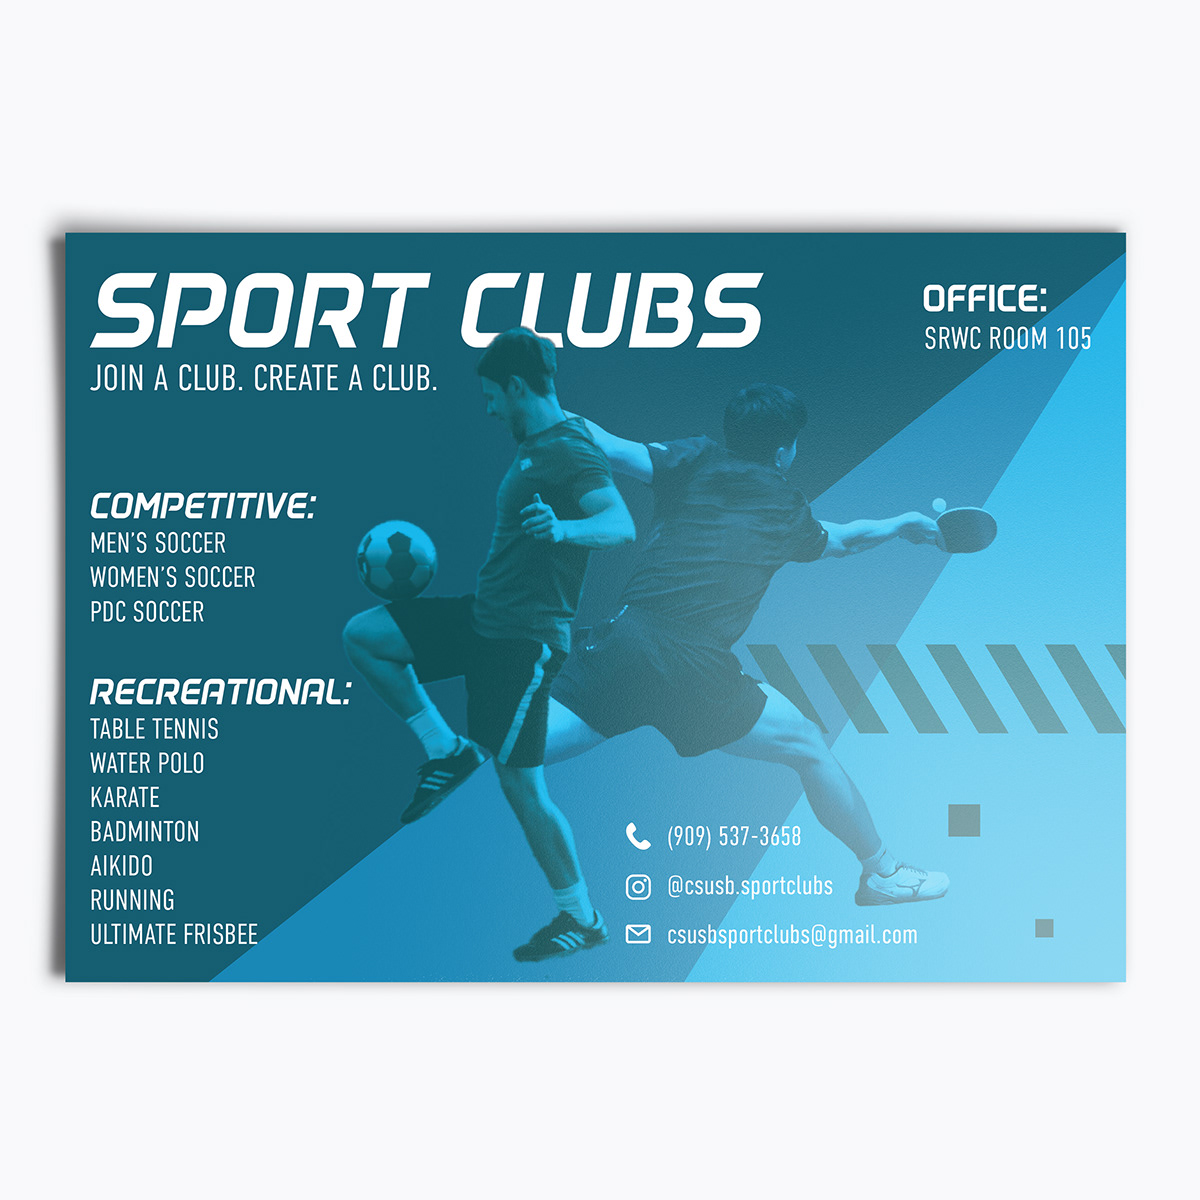 Join sport